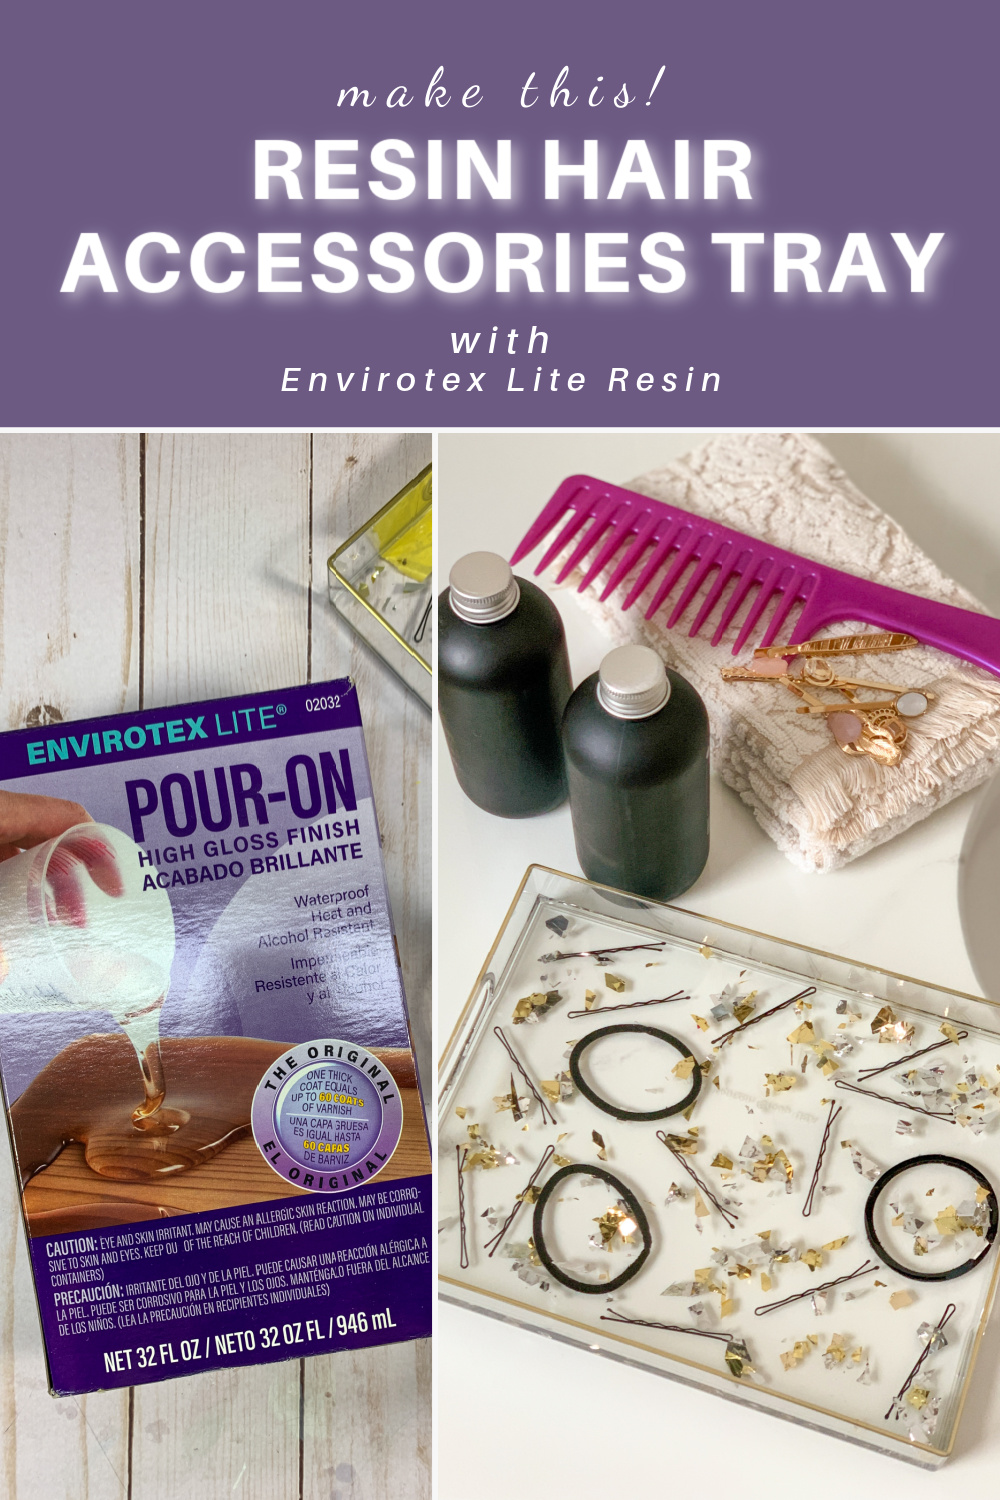 Embed hair accessories like bobby pins and ponytail holders in resin to create the cutest vanity tray around! Use this tray to organize your hair products and accessories in style. via @resincraftsblog